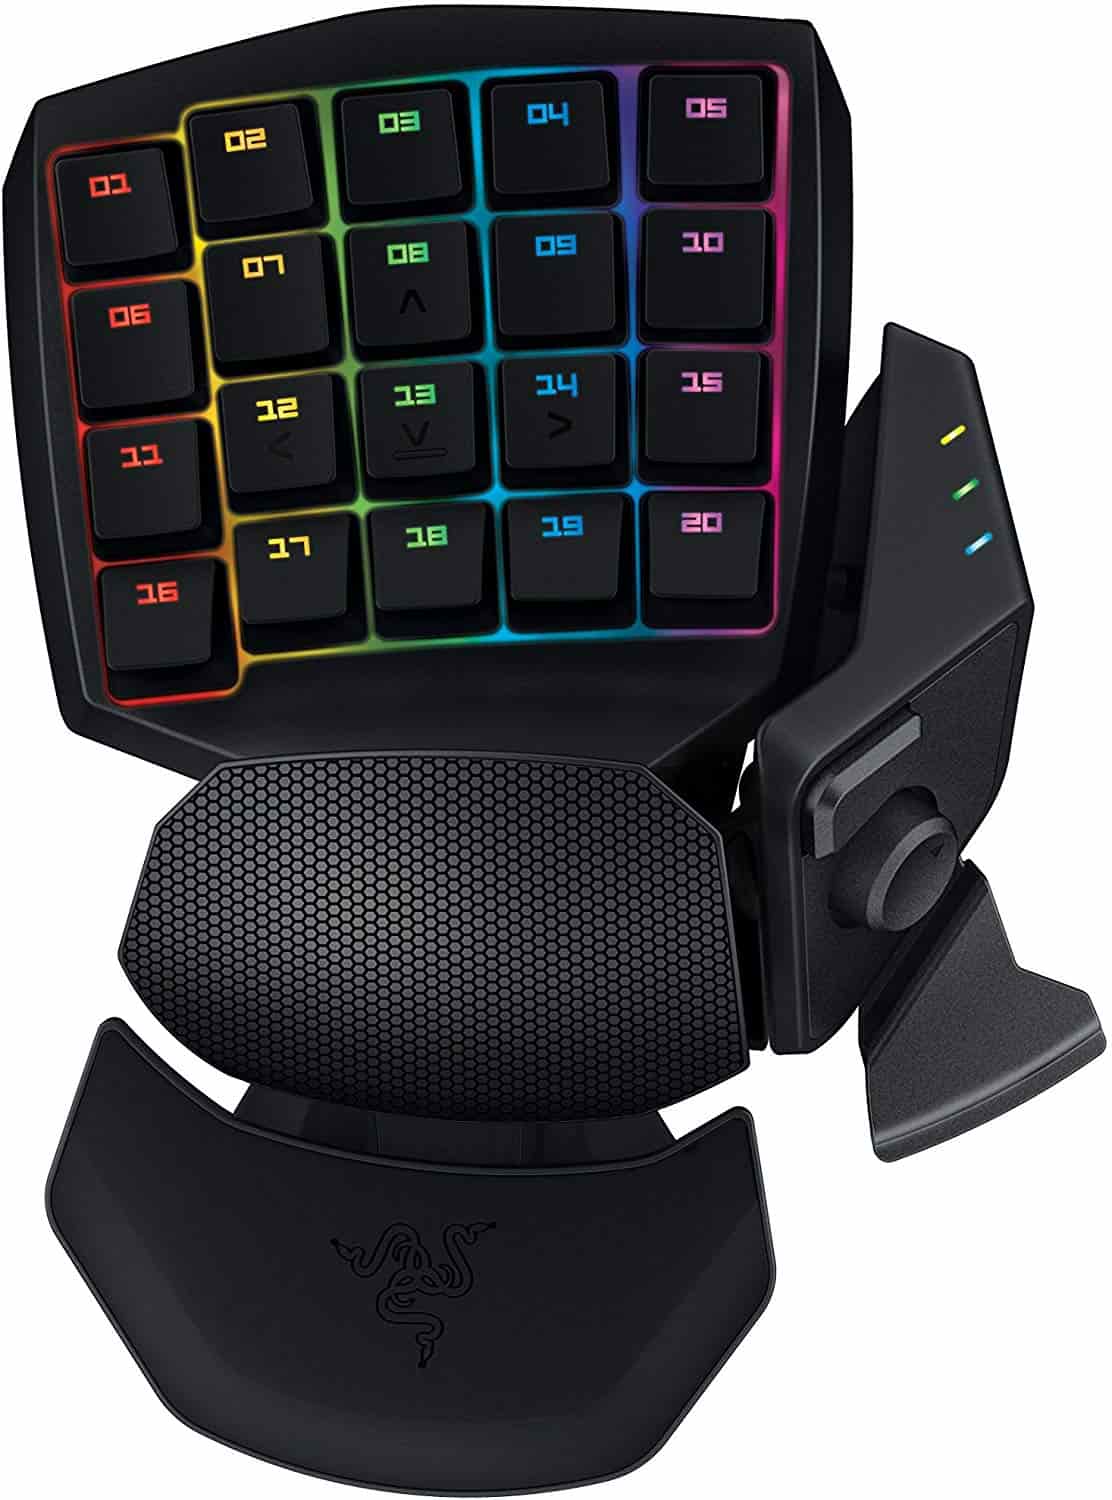 etc. for Typing Games Macro Programming Mouse Cuifati Wired Gaming Keyboard onebutton Volume Control Office Entertainment